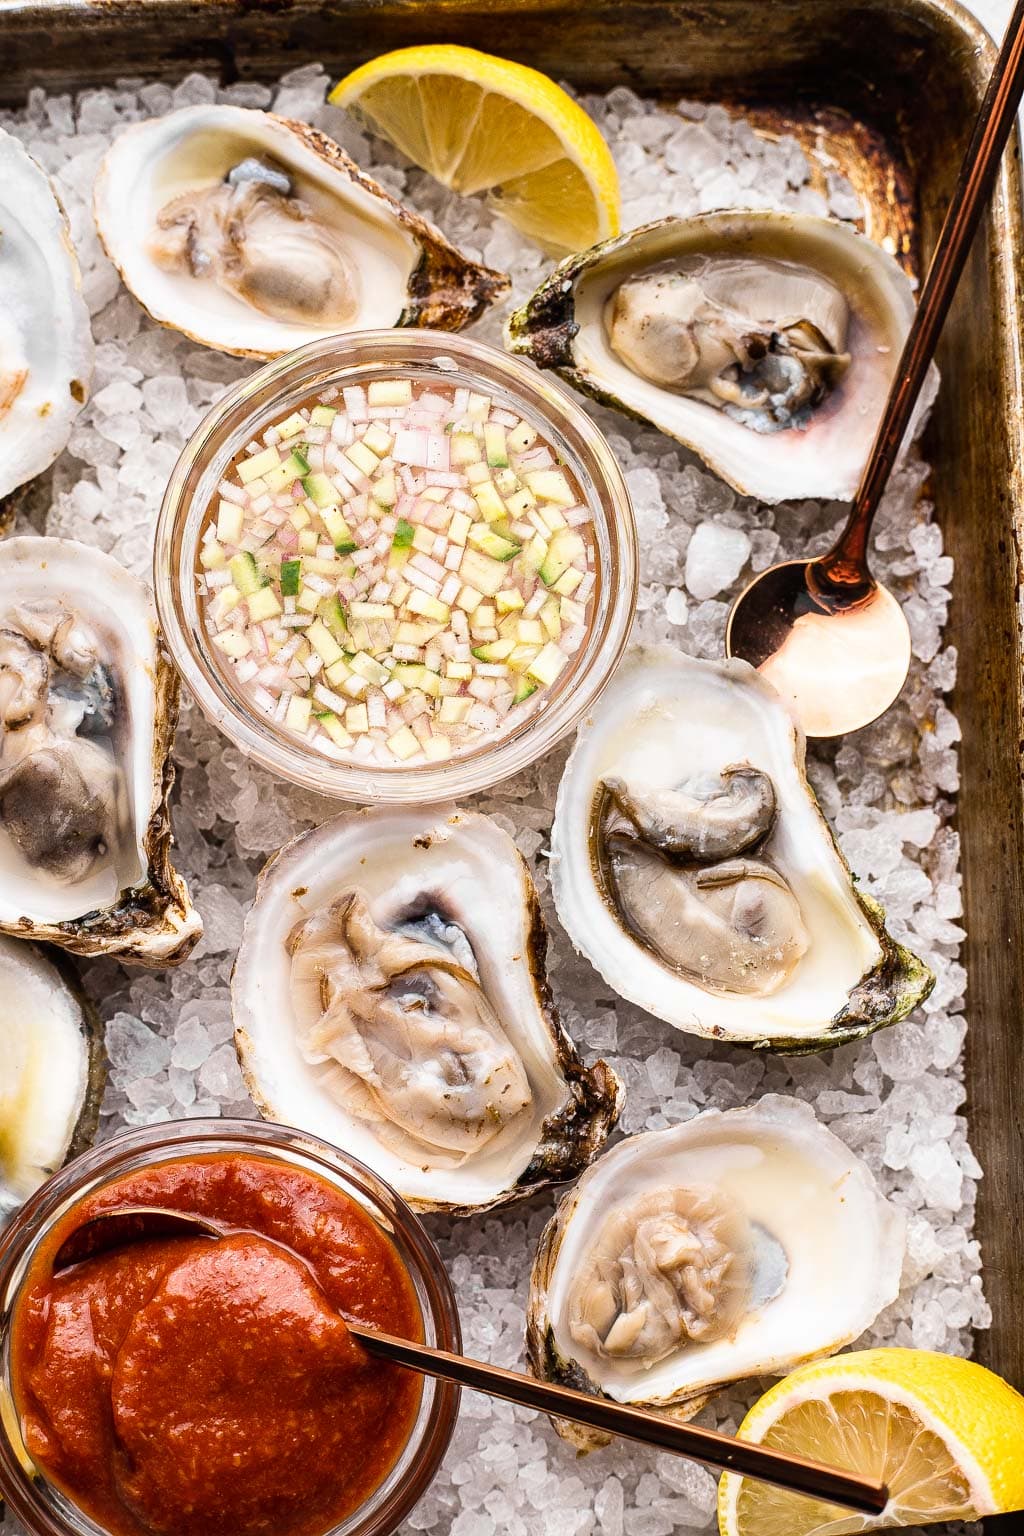 Oysters with Mignonette